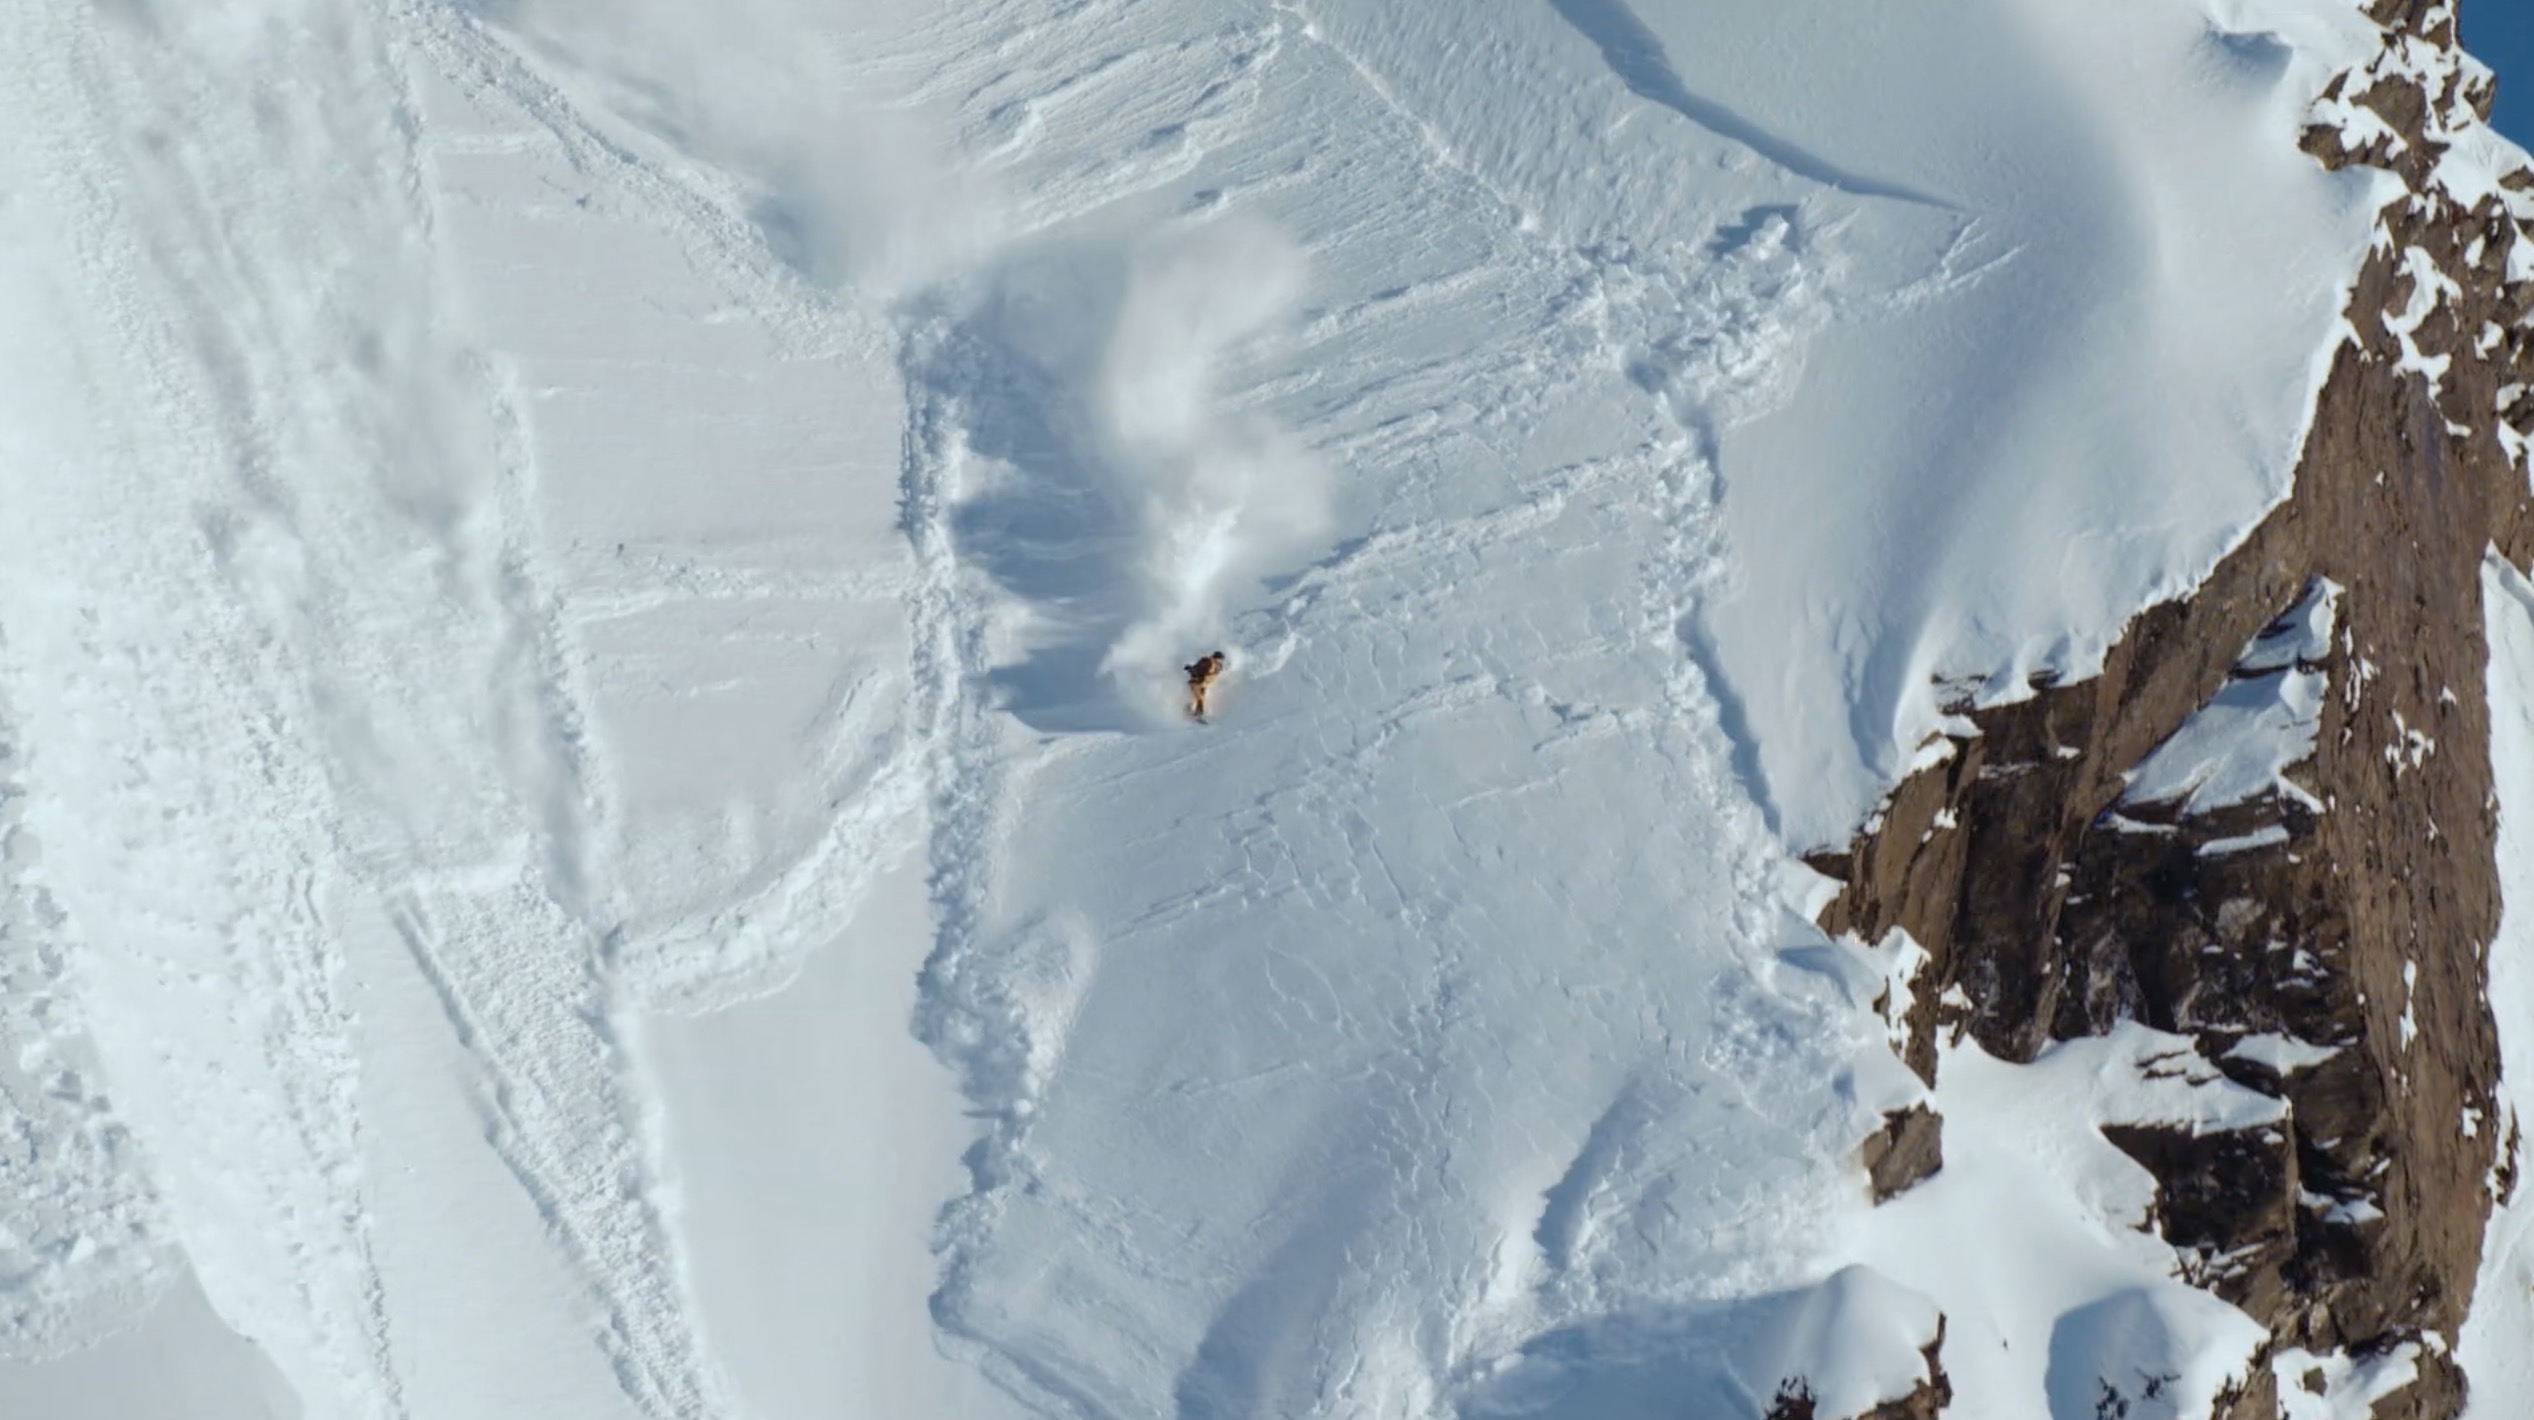 A new online course will cover basic elements of avalanche